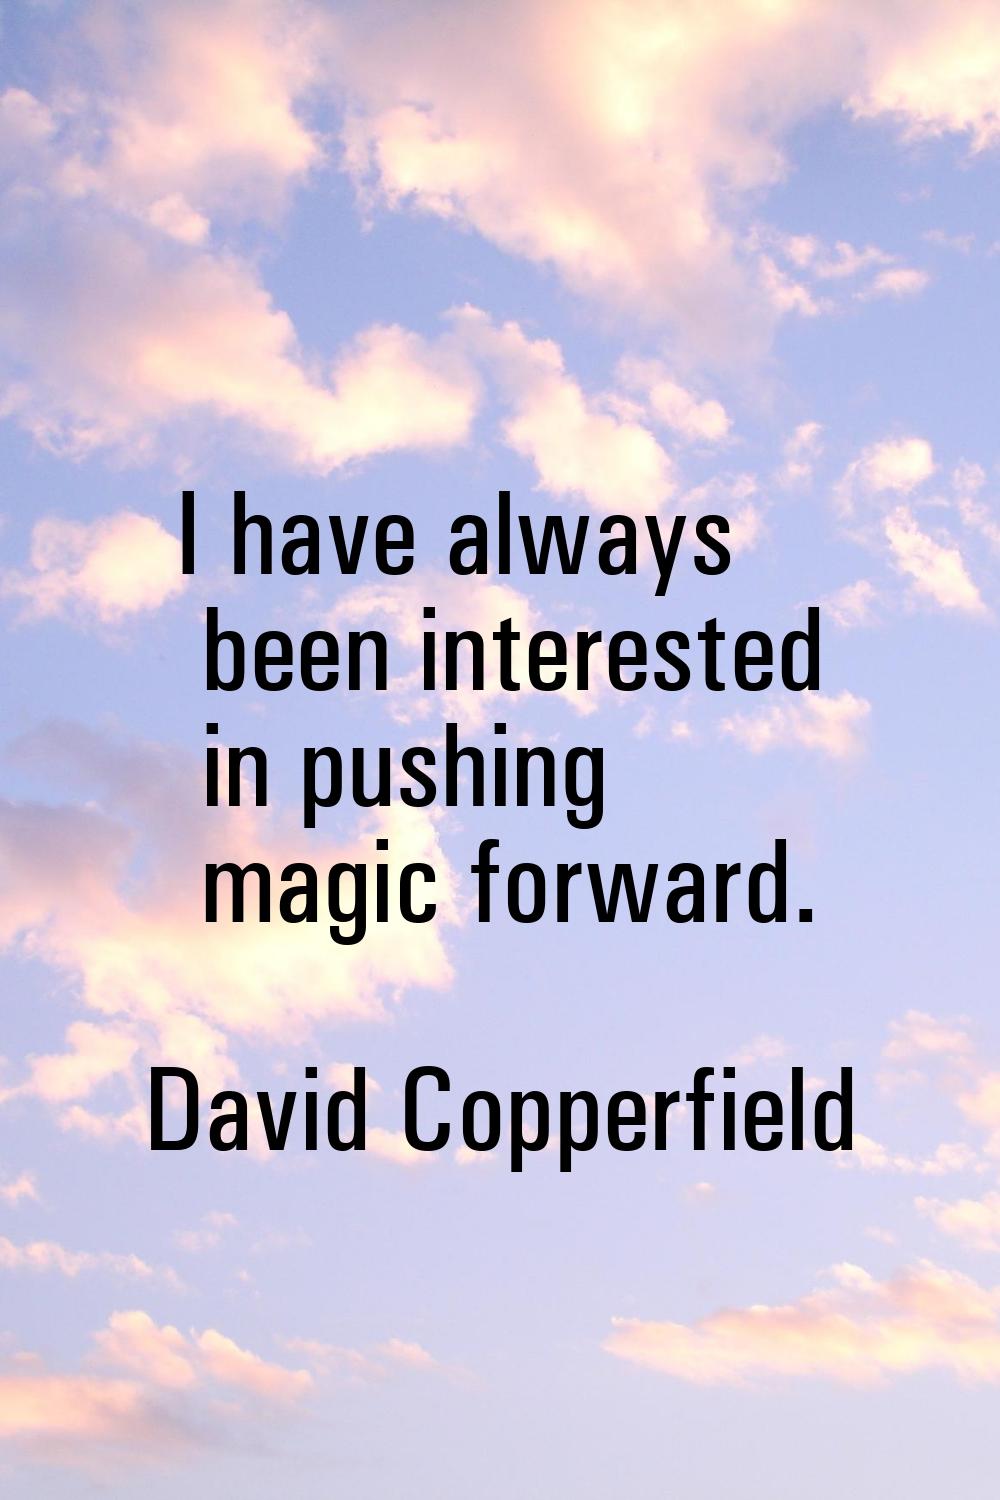 I have always been interested in pushing magic forward.